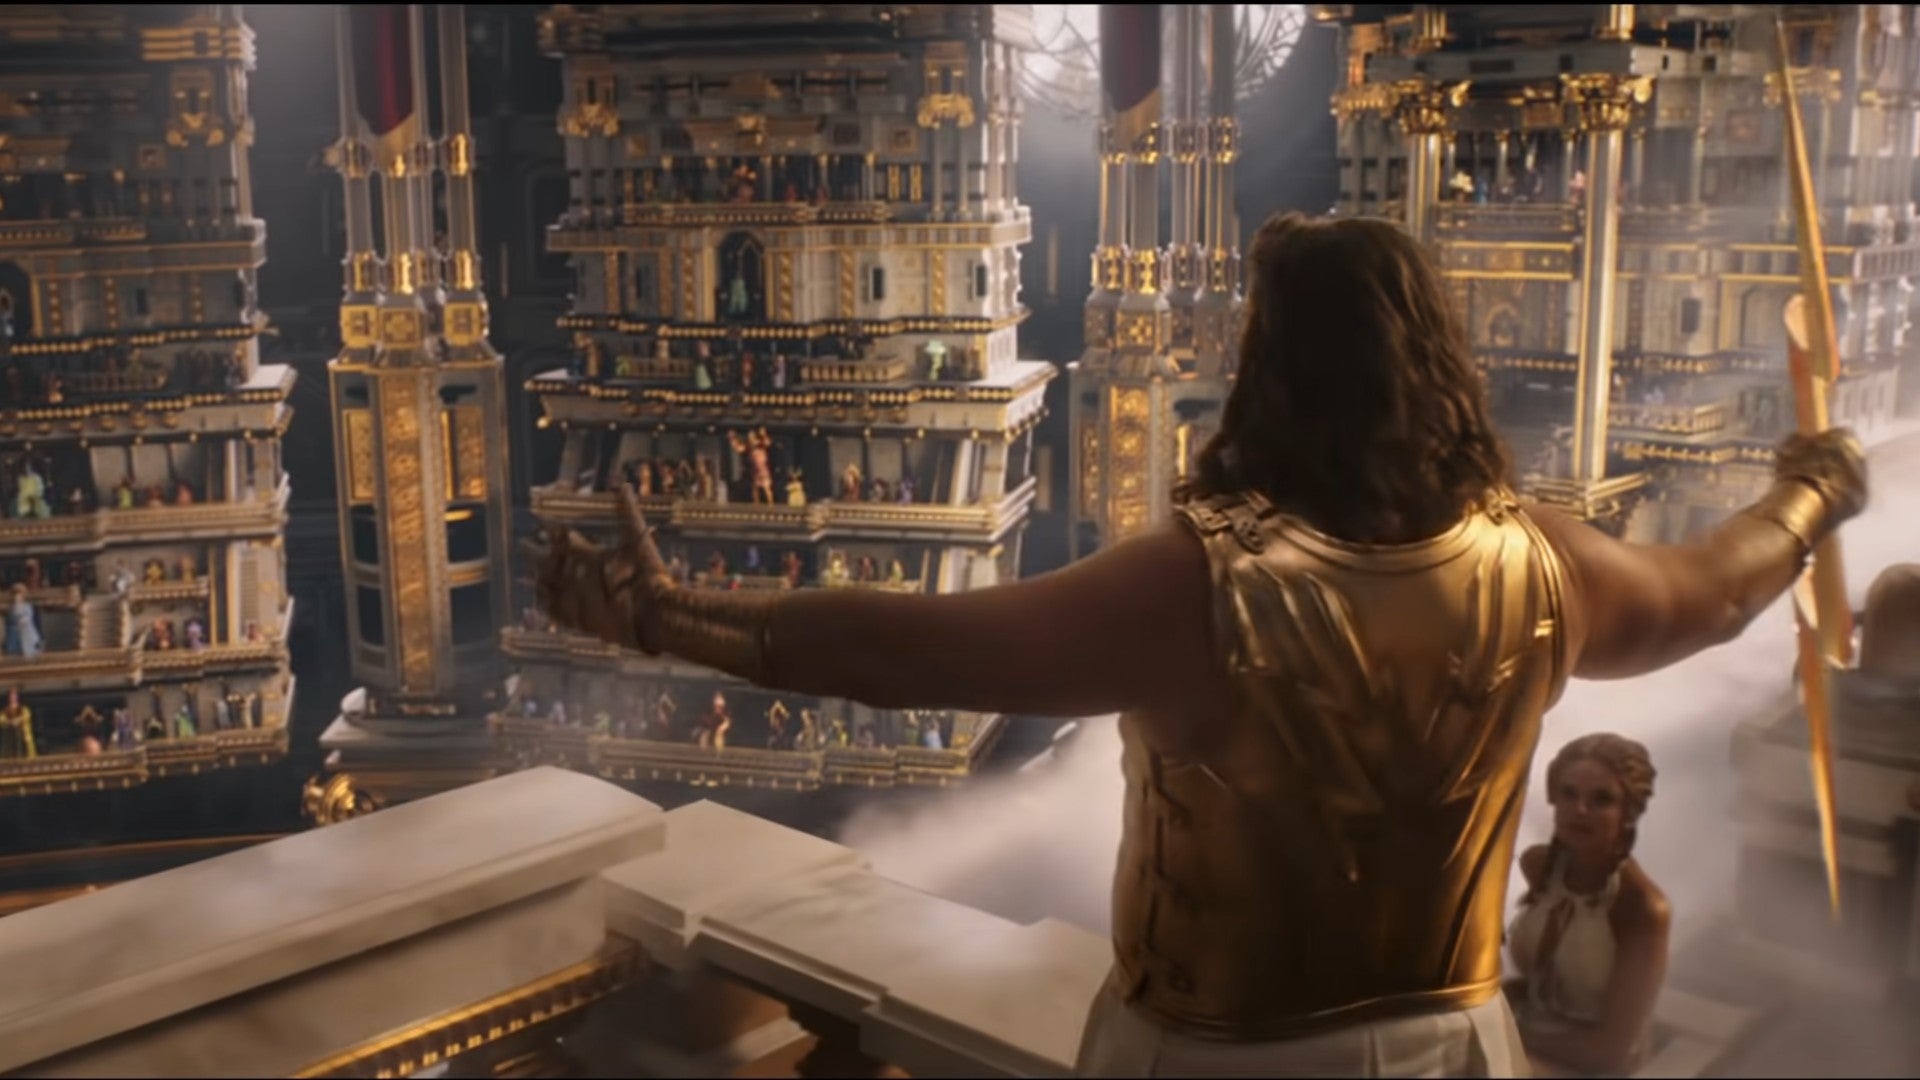 Still from Love and Thunder trailer showing the back of Russell Crowe as Zeus, holding a lightning bolt